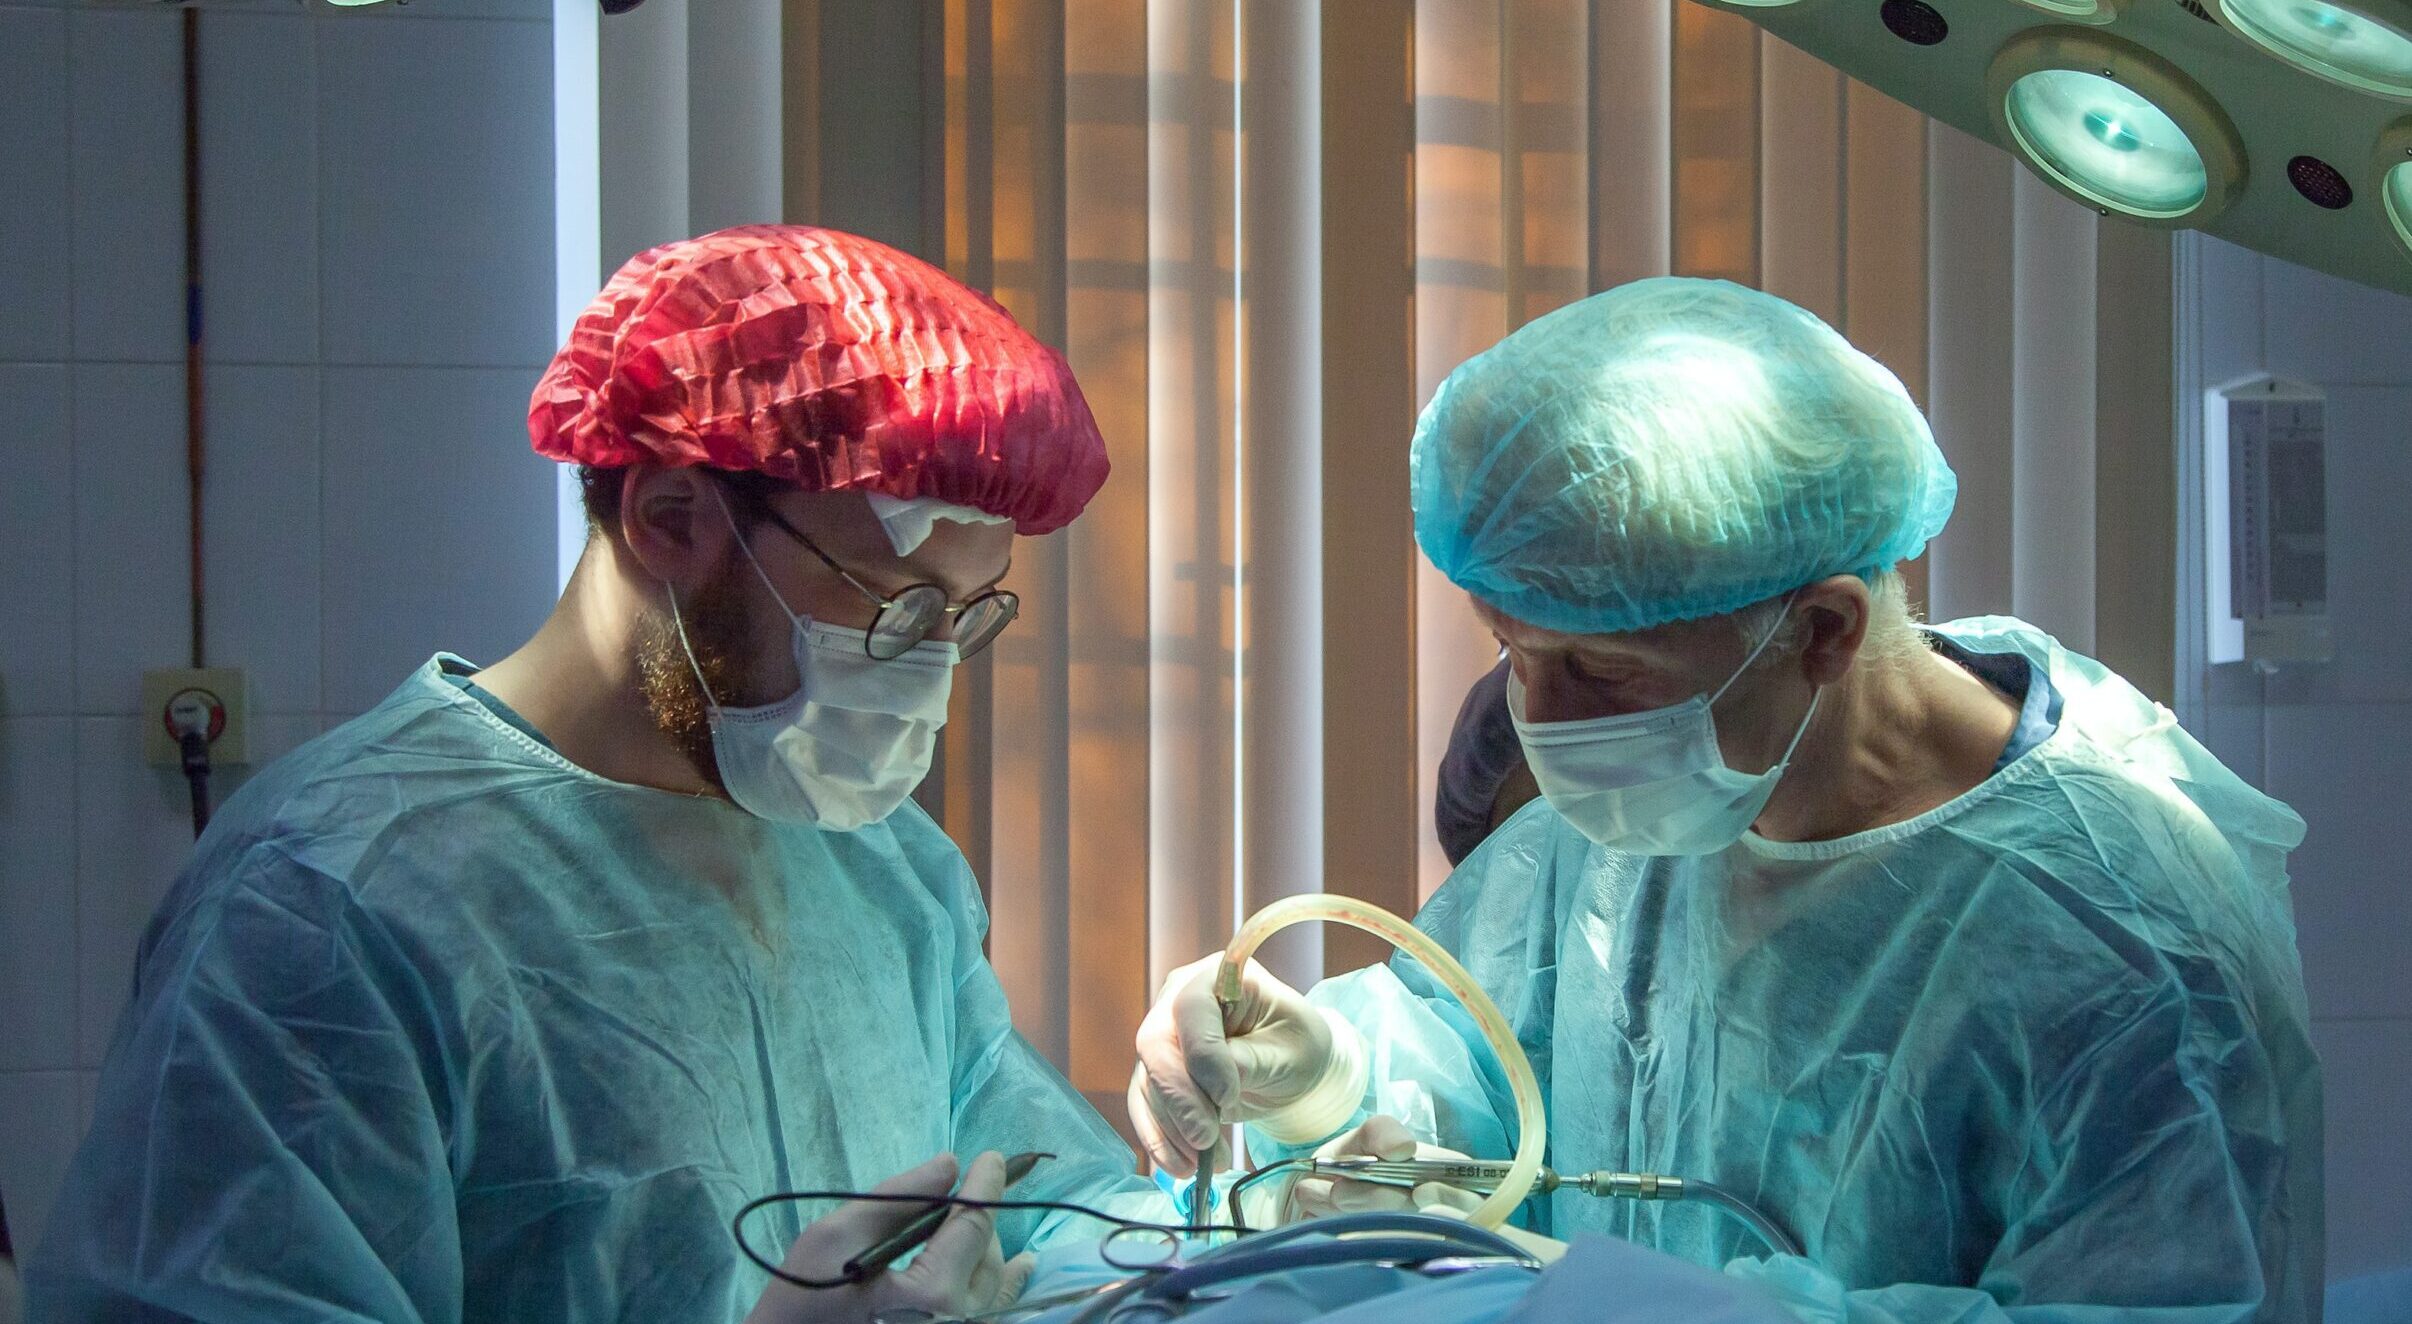 Surgeons during a surgery